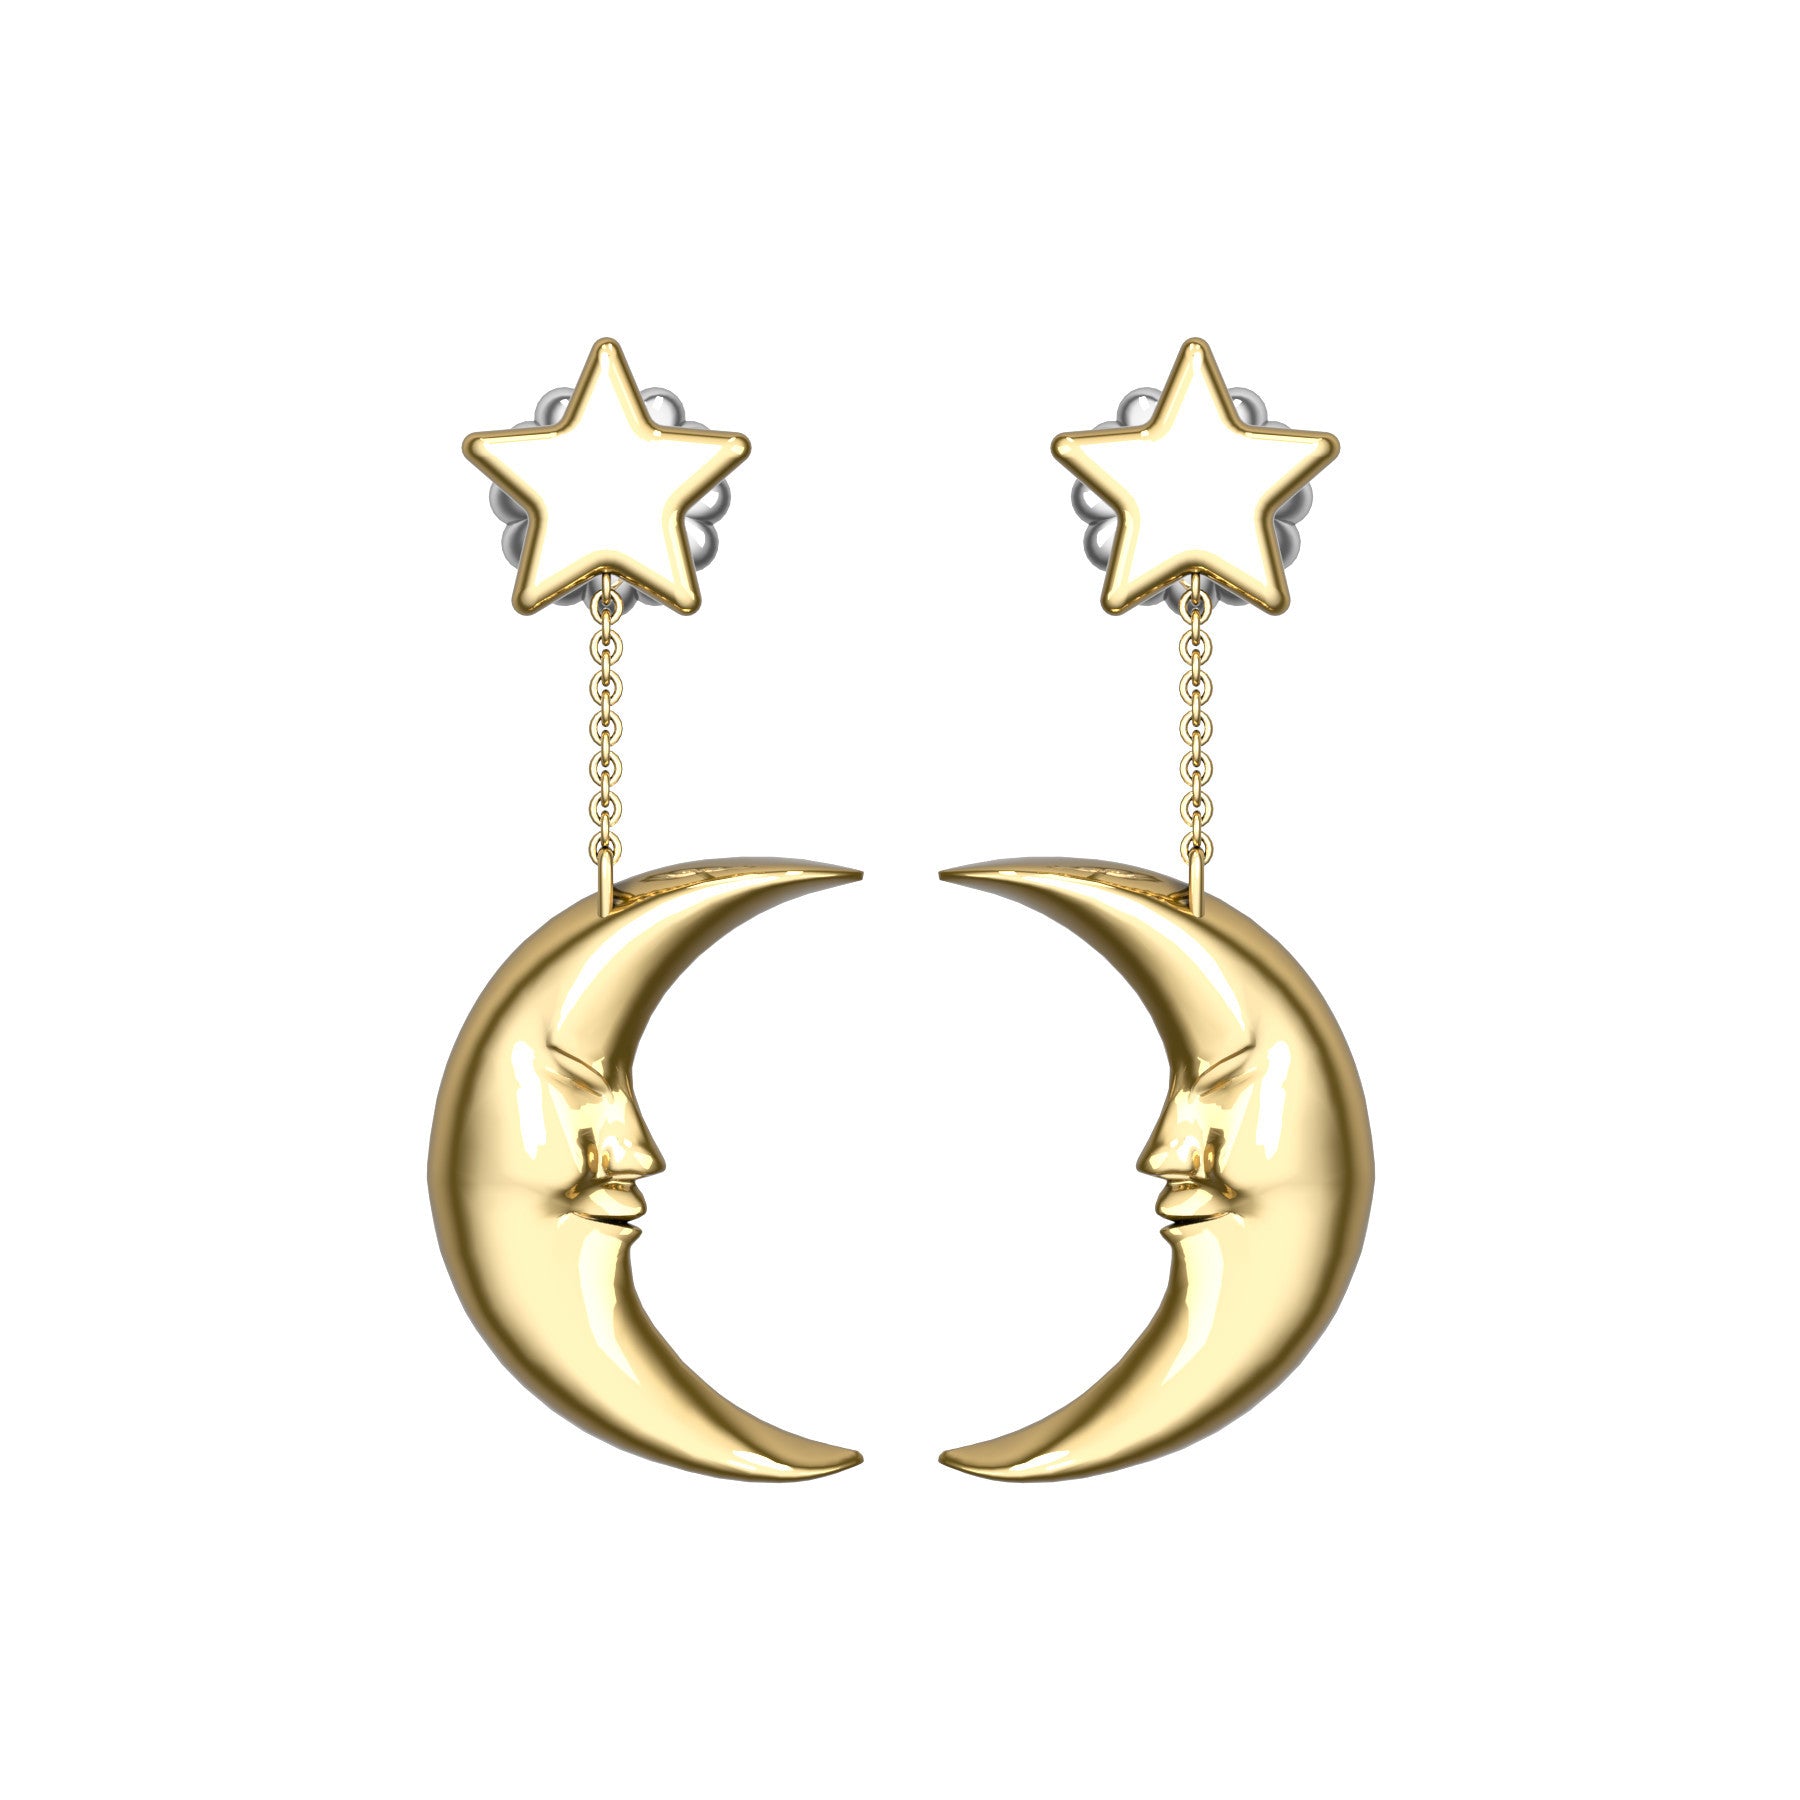 moon earrings, 18 K yellow gold, weight about 5,2 g (0.18 oz), length 36,5 mm